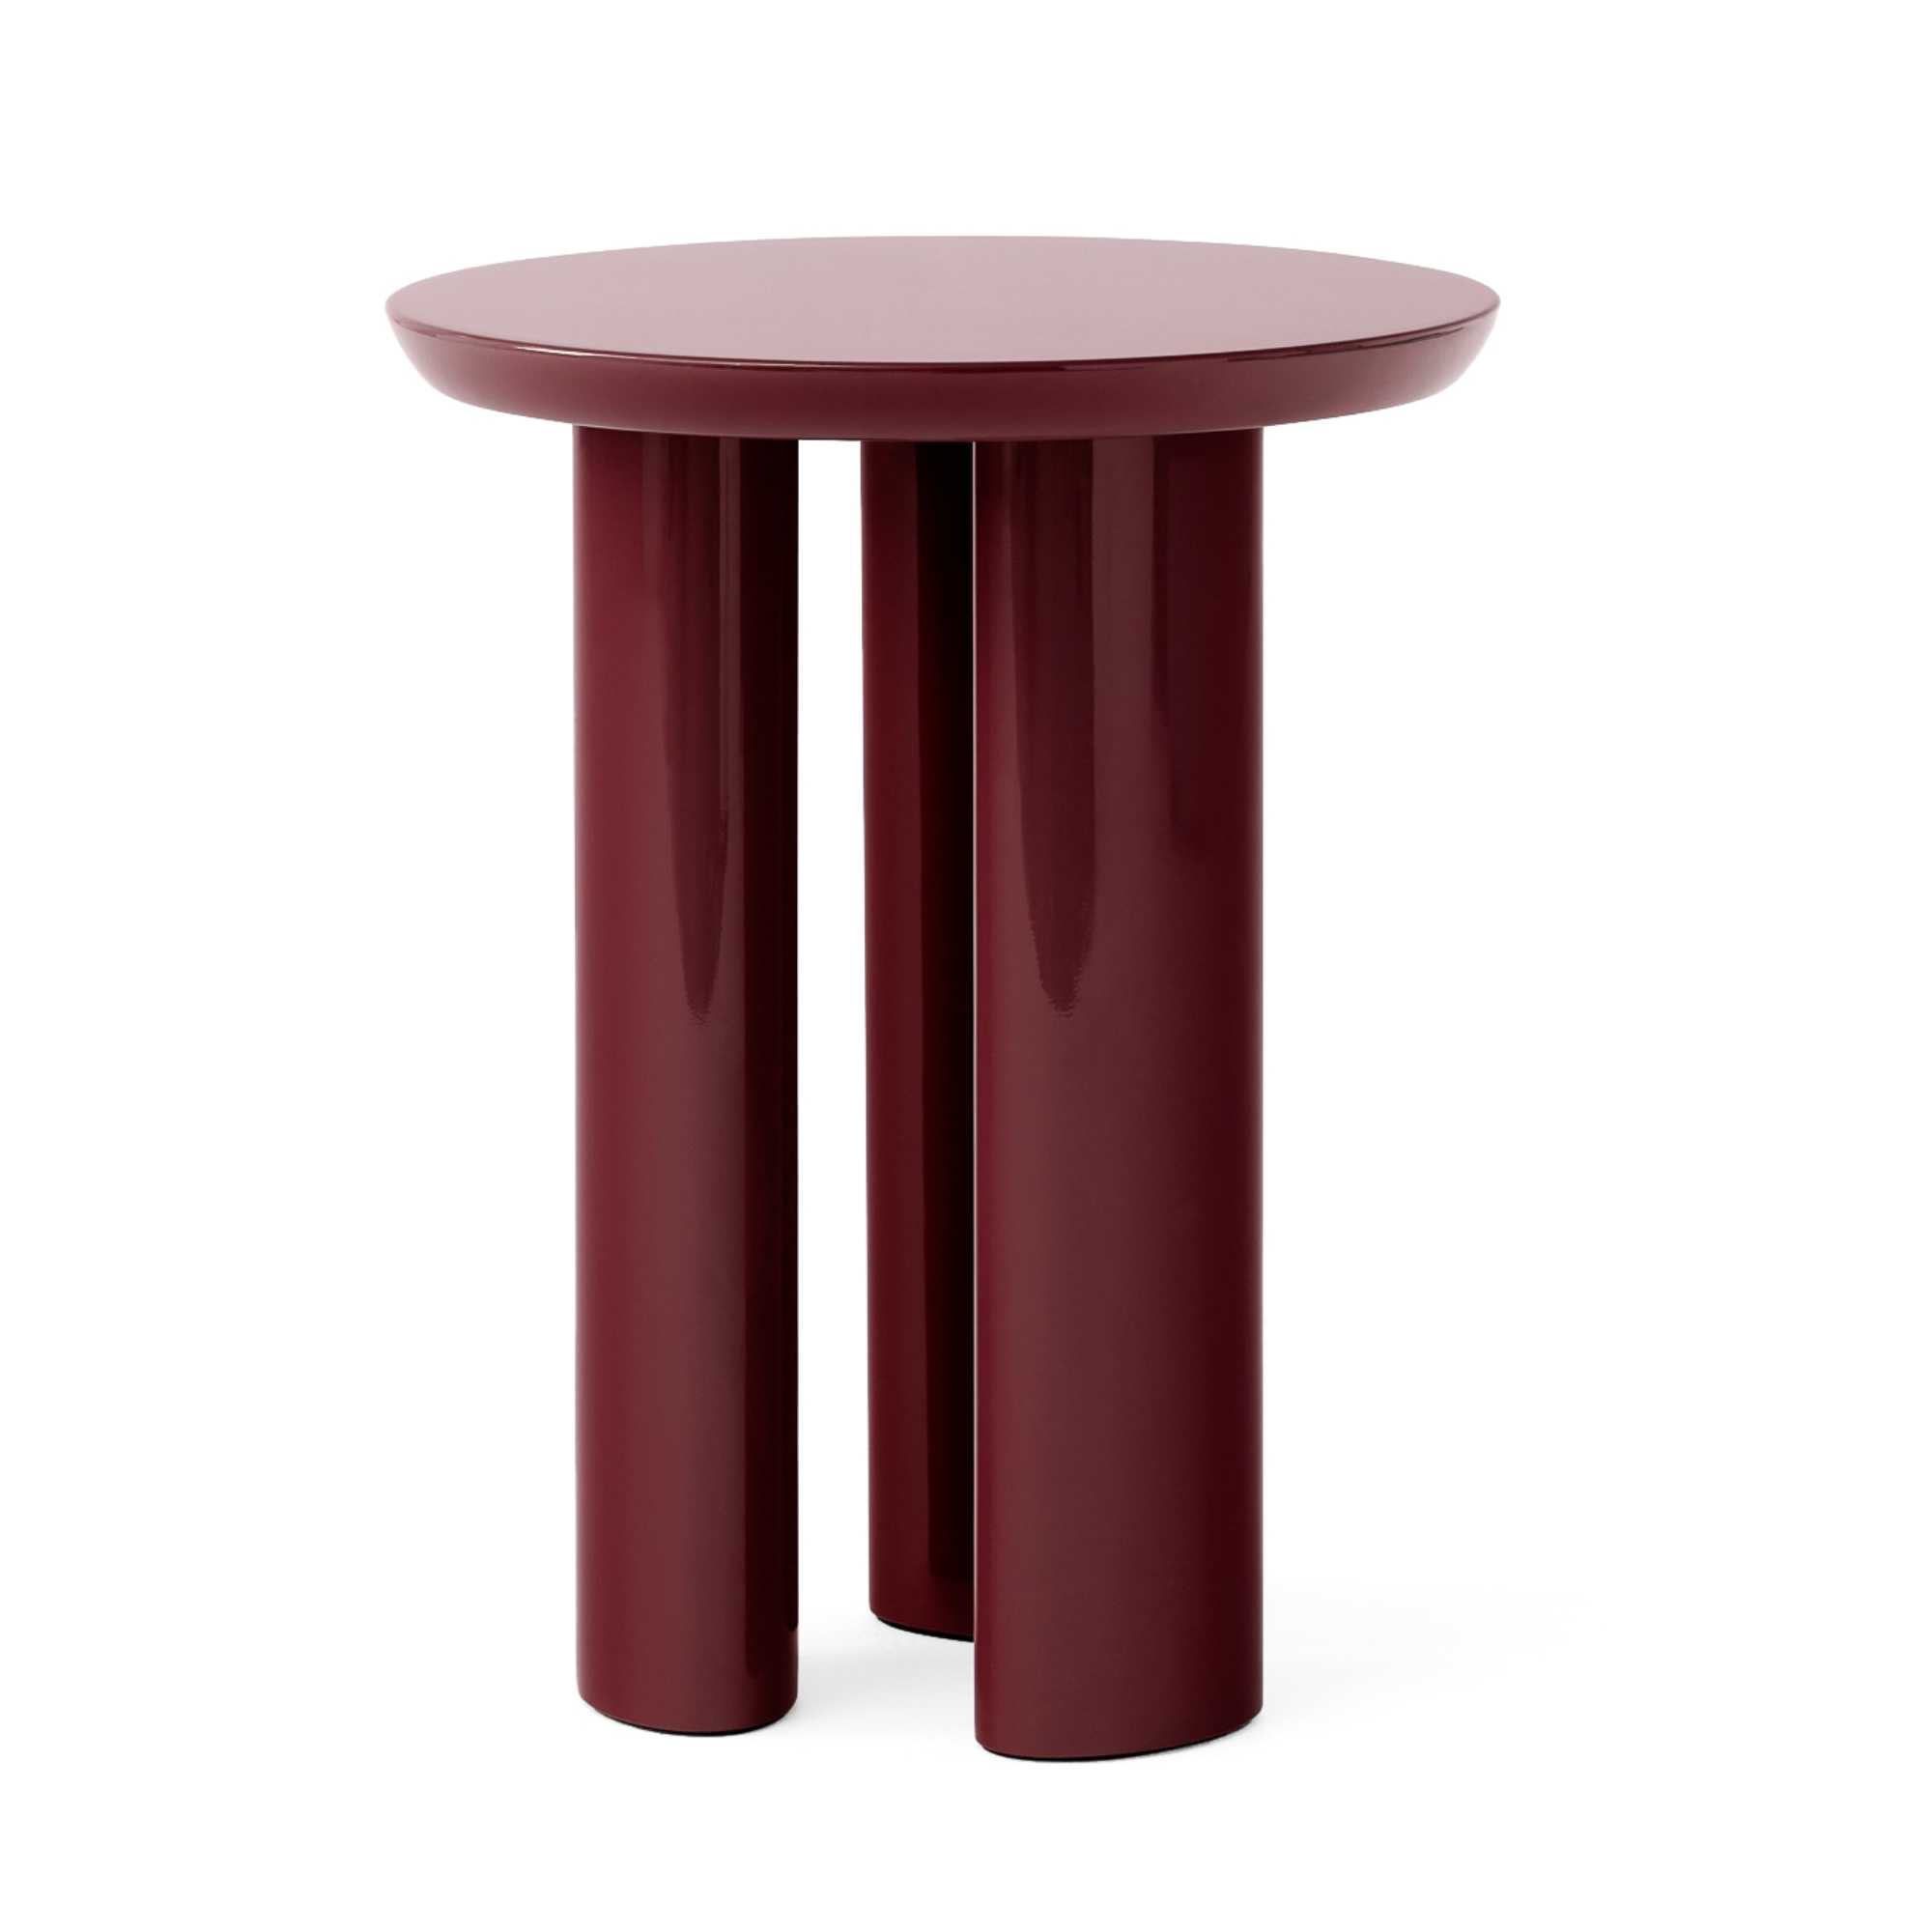 &Tradition JA3 Tung Side Table , Burgundy Red